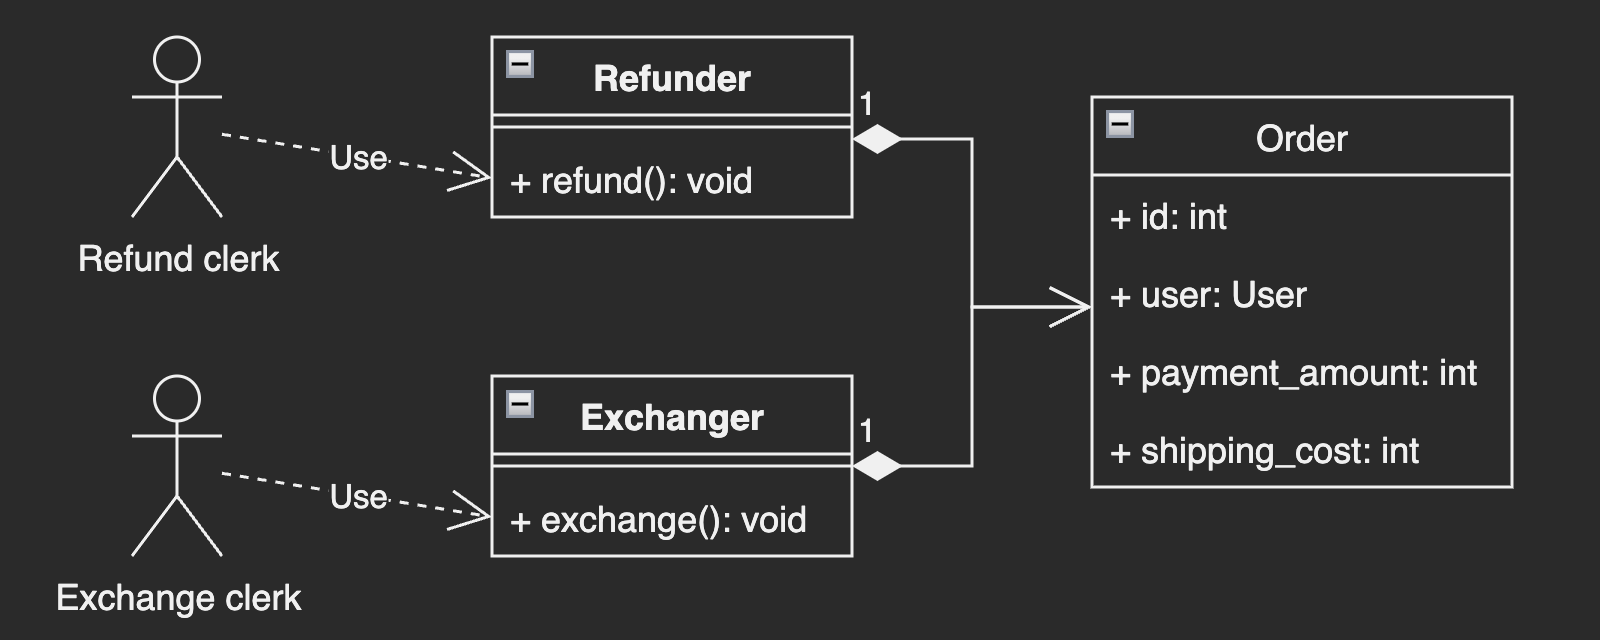 Refunder and Exchanger